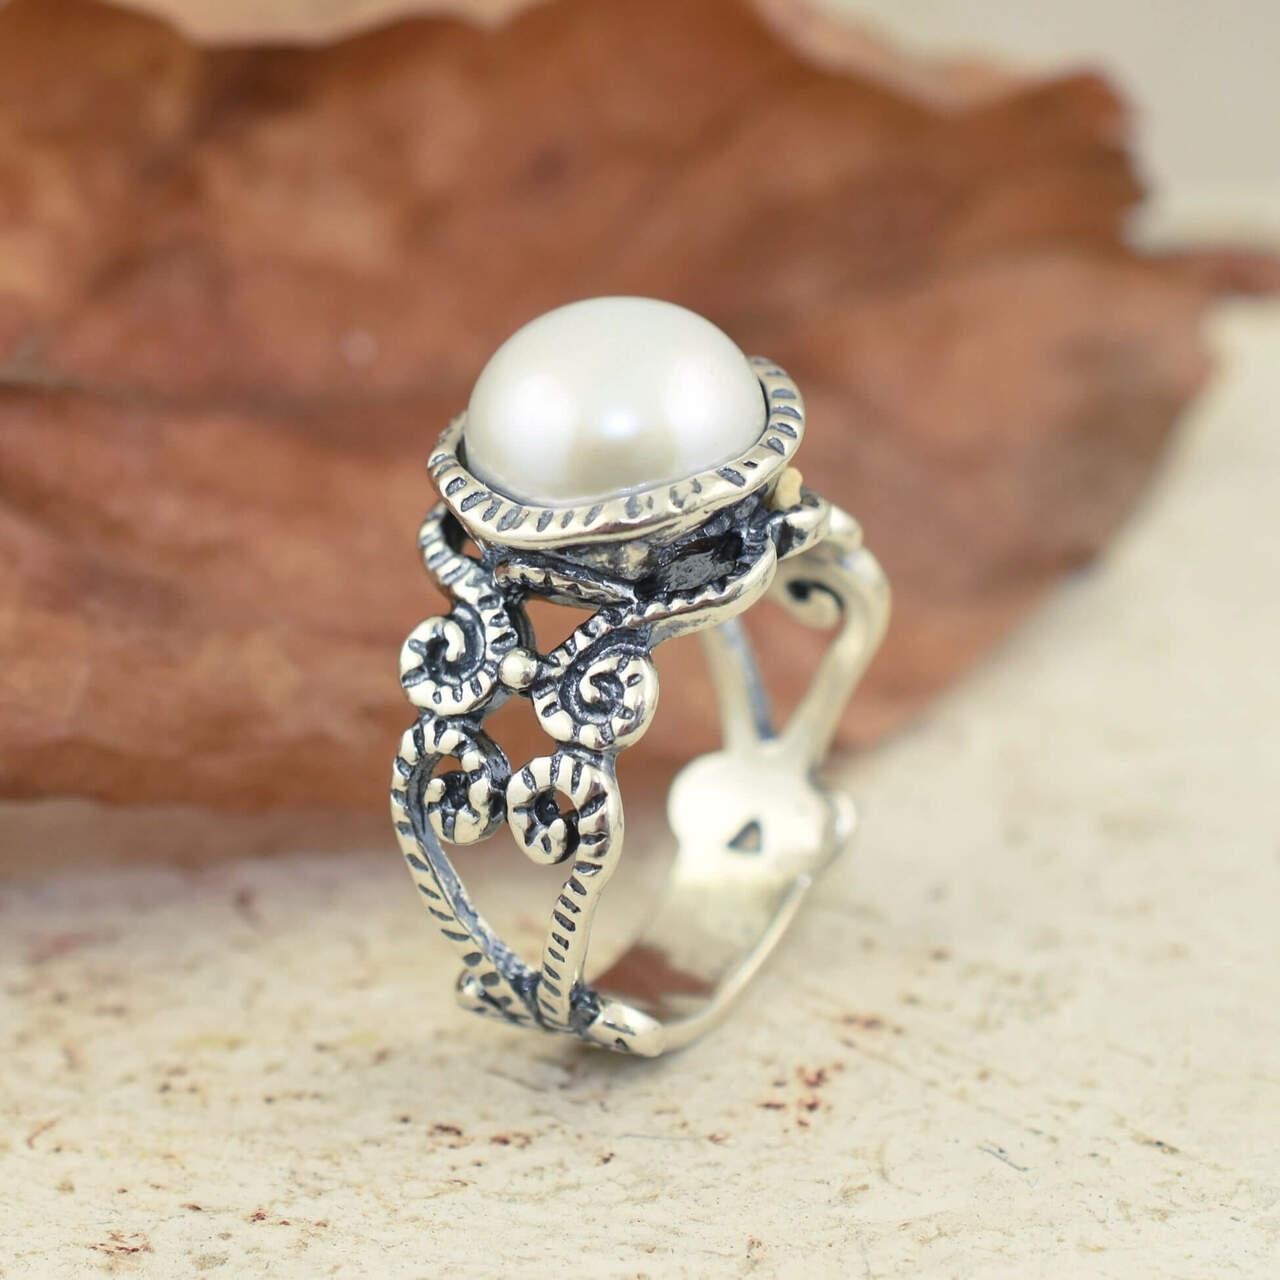 .925 sterling silver ring Posh Pearl with ornate band